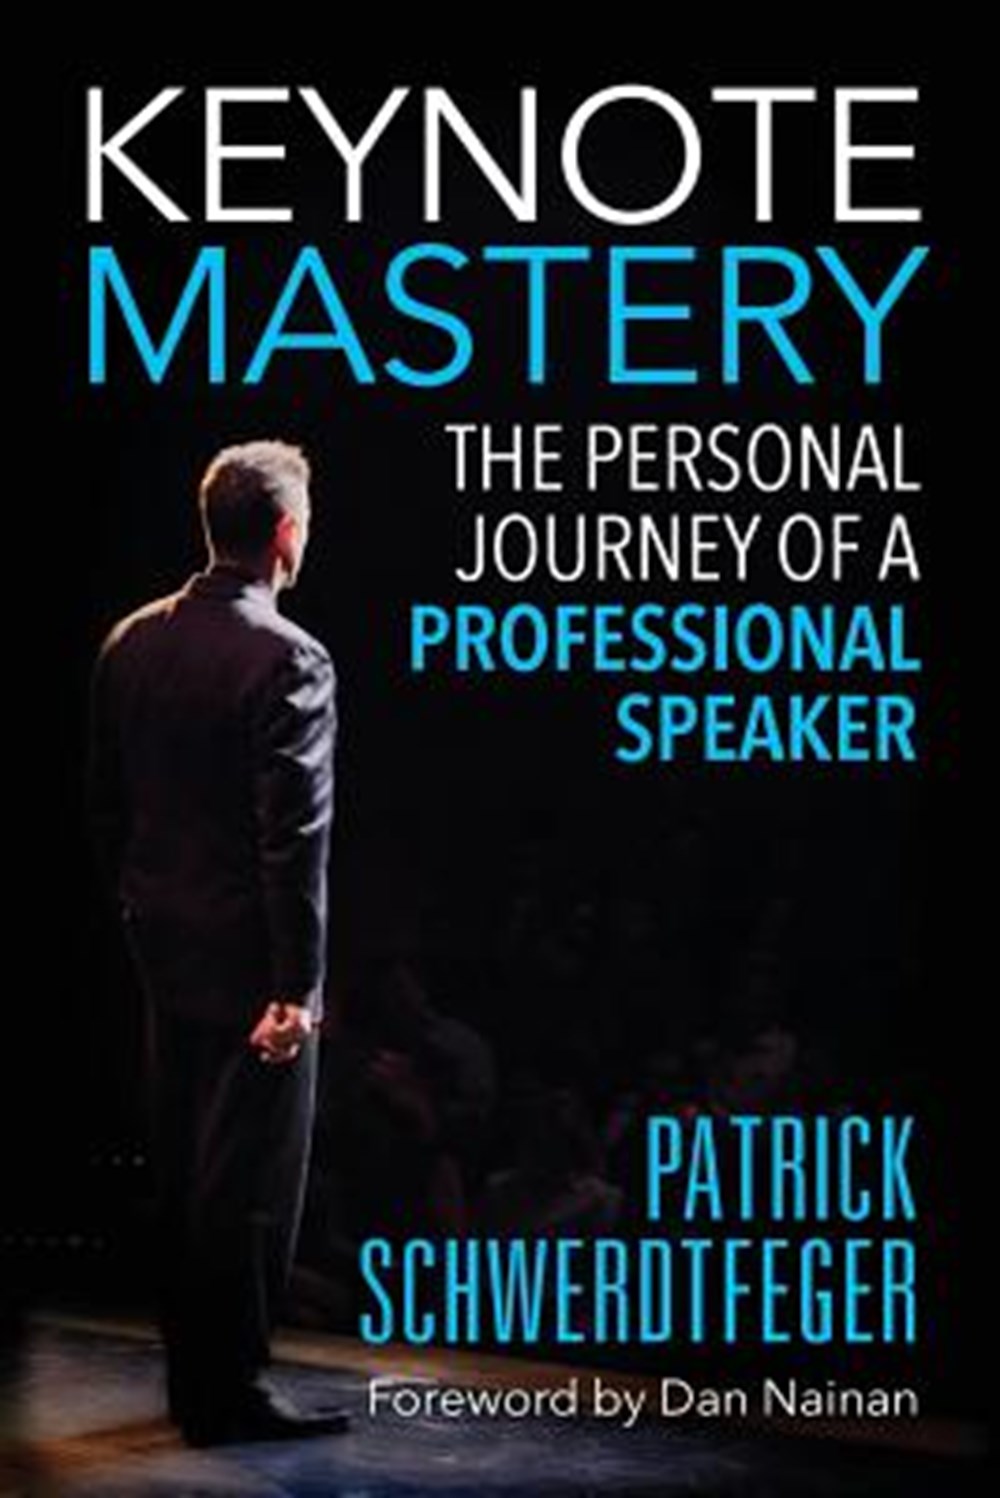 Keynote Mastery The Personal Journey of a Professional Speaker